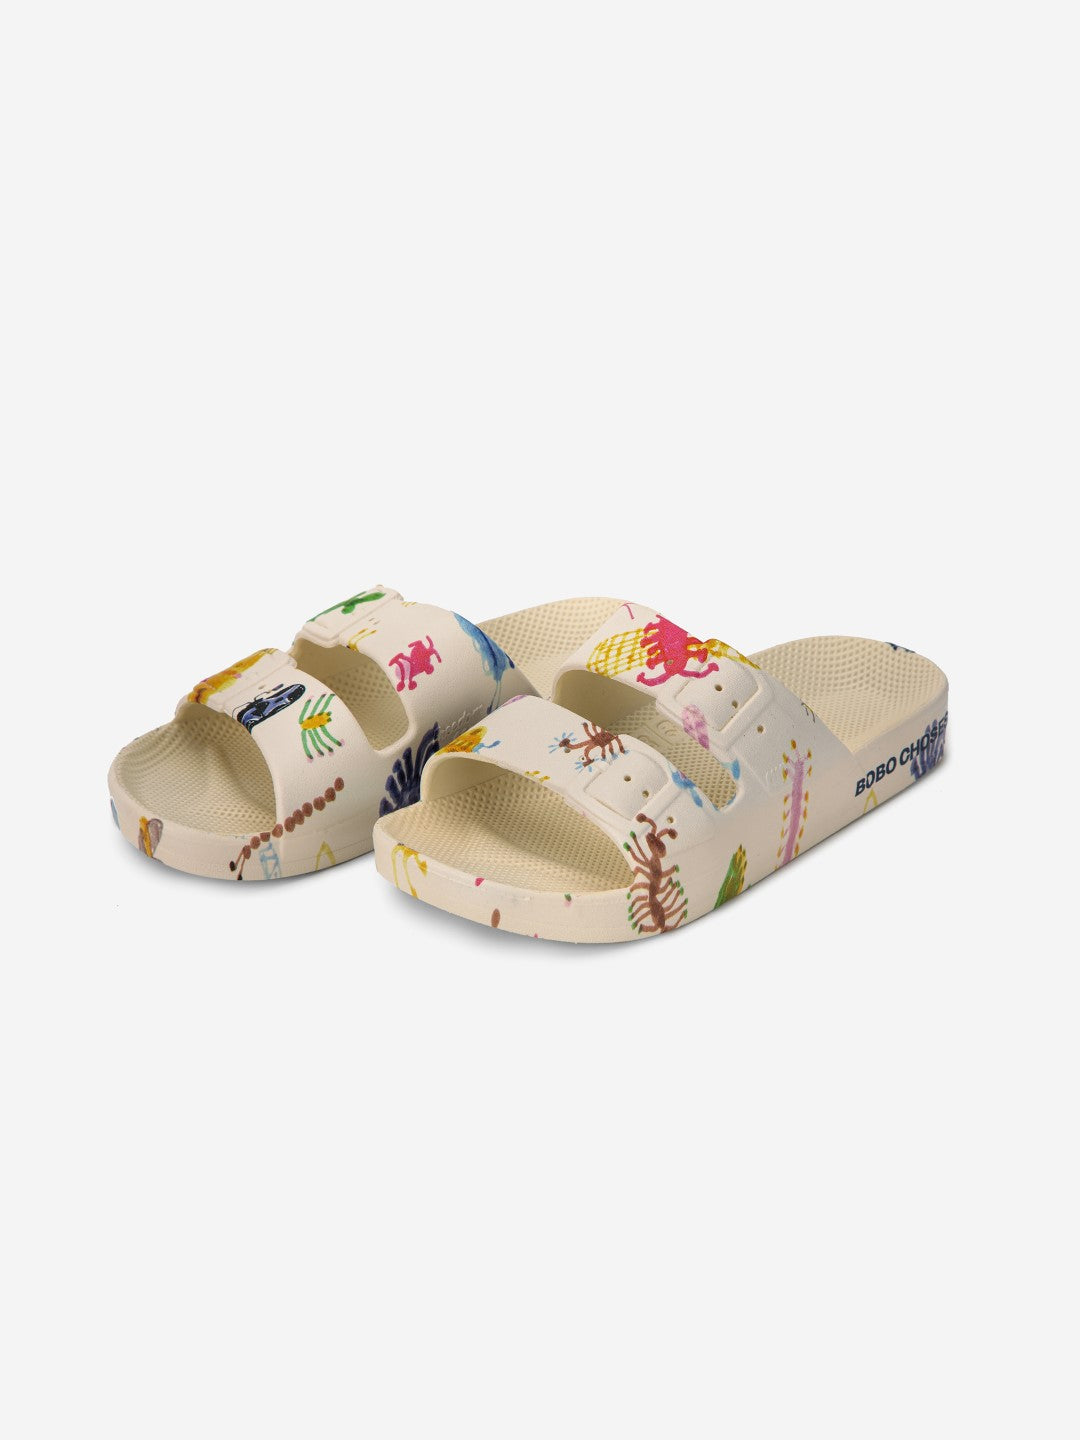 Funny Insect Freedom Moses X Bobo Choses Sandals